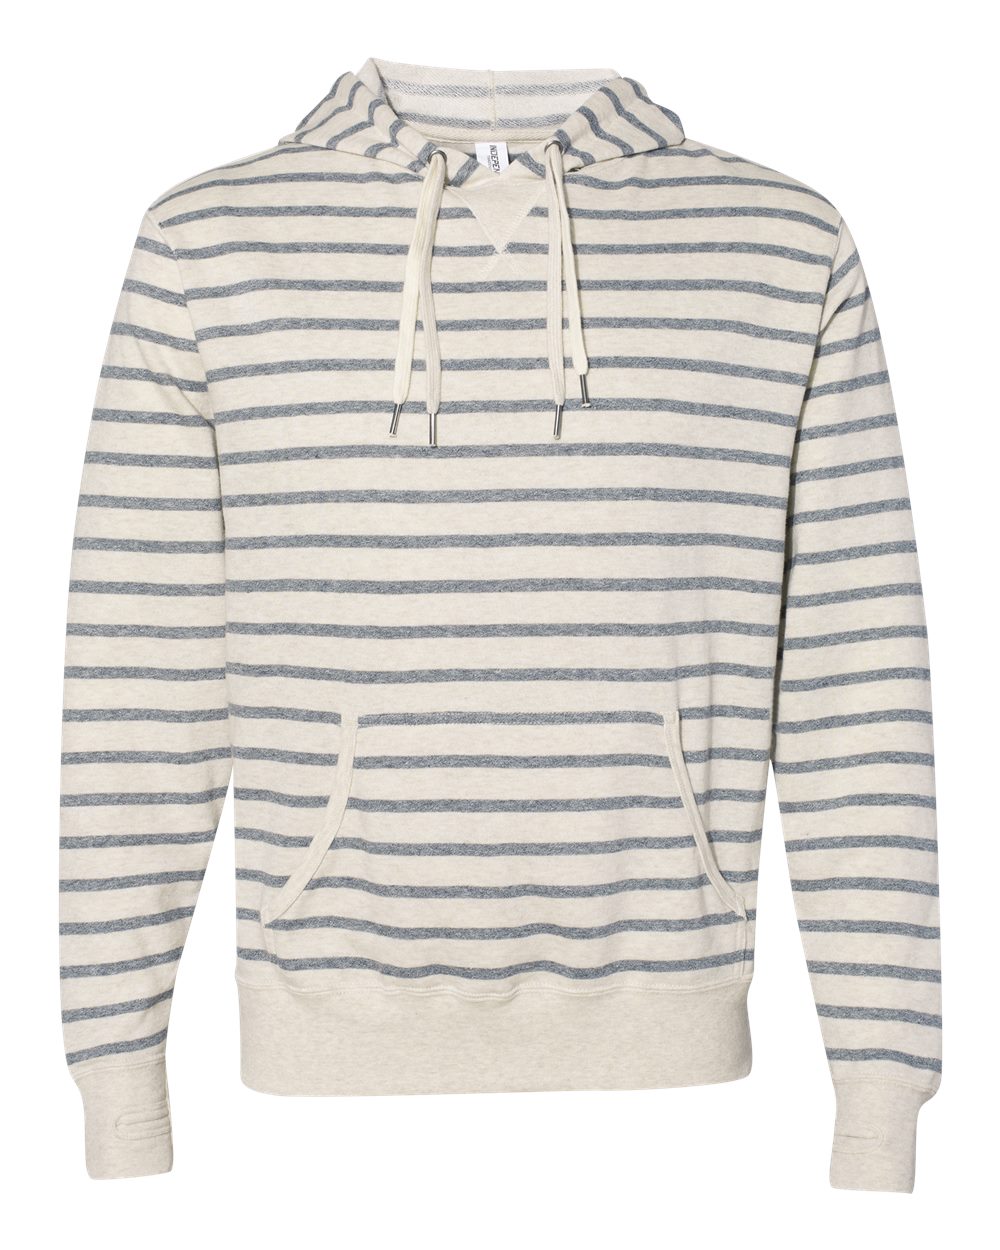 Independent Trading Co. - Midweight French Terry Hooded Sweatshirt